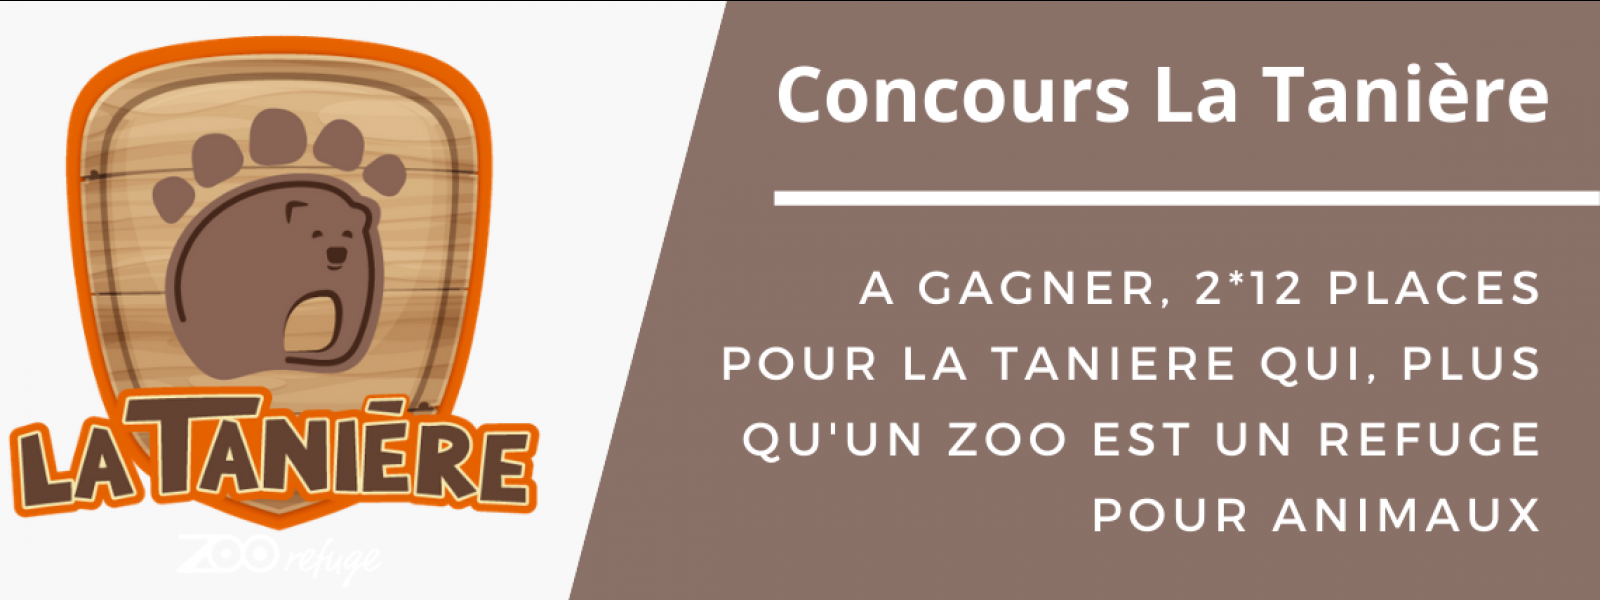 TANIERE CONCOURS REFUGE ANIMAUX